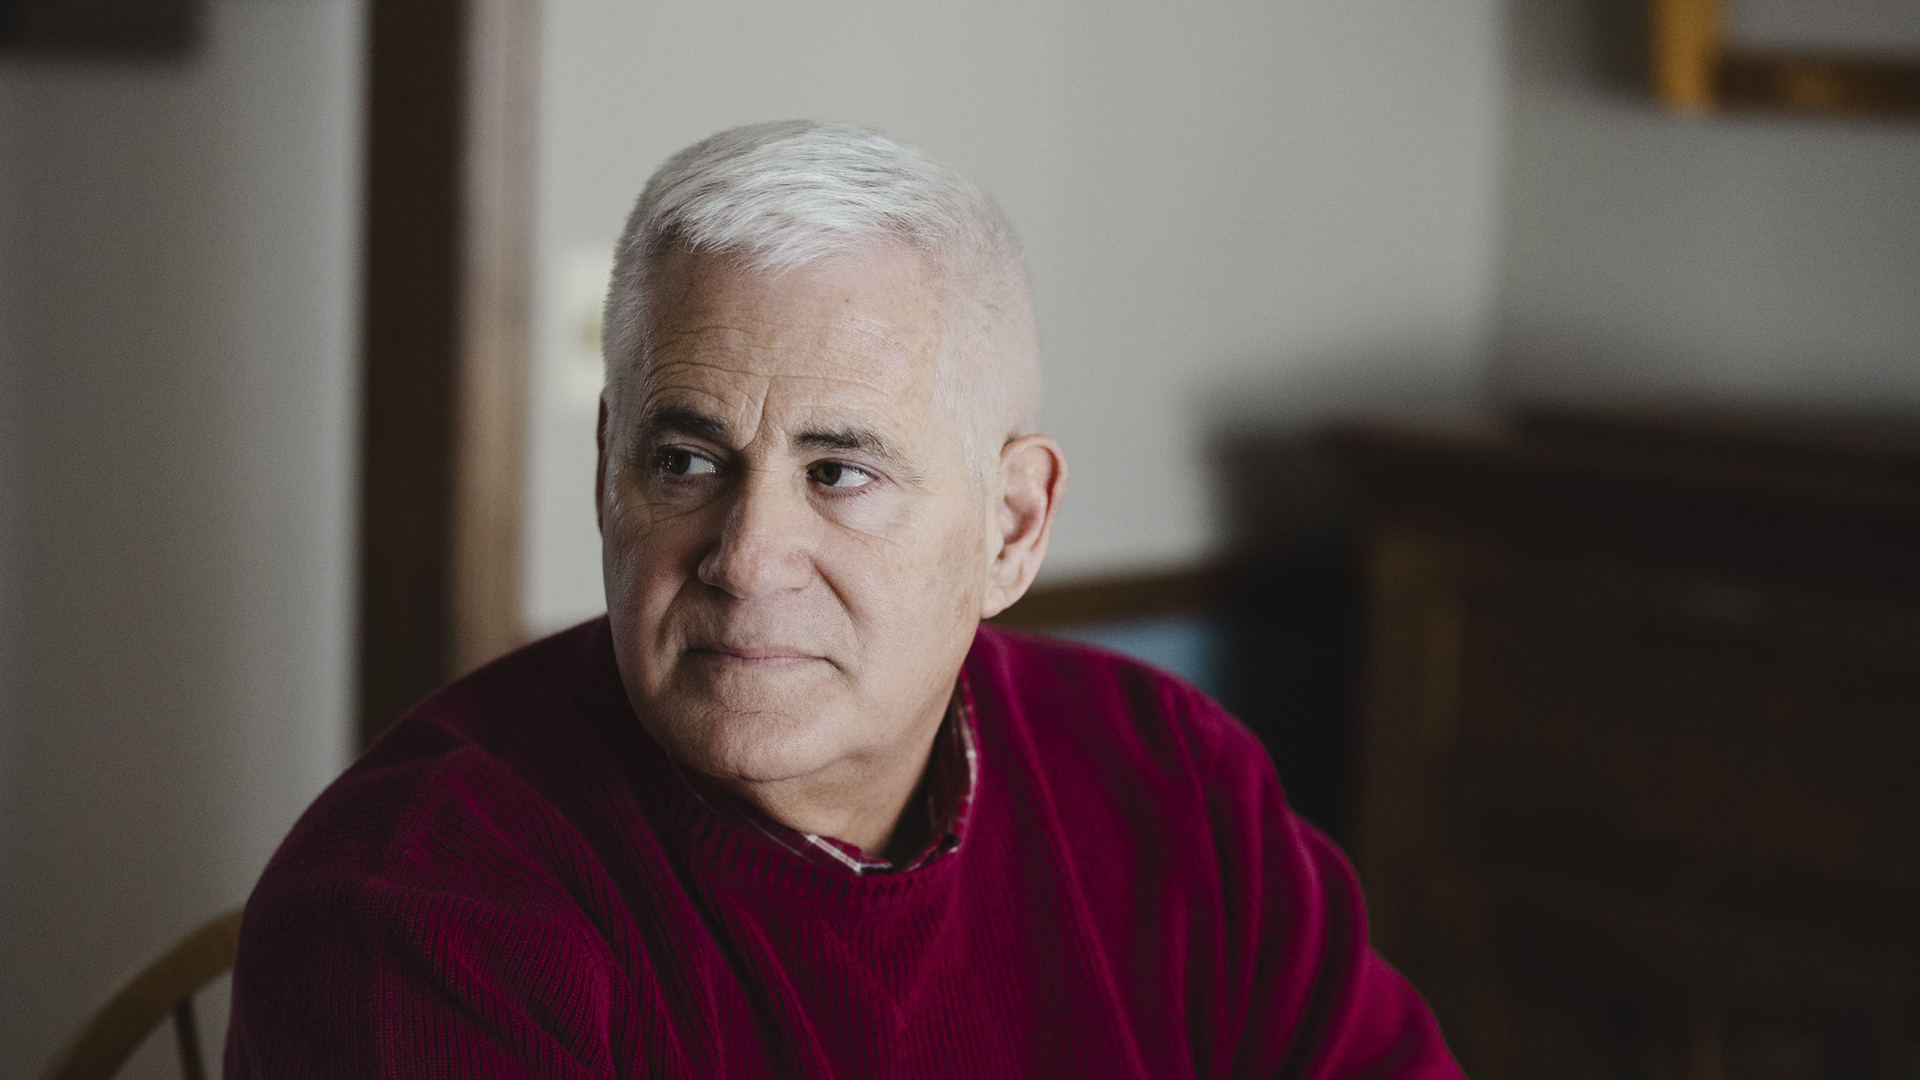 Ed Wall poses for a portrait while seated in a chair and looking to his right, in a room with out-of-focus wood furniture in the background.